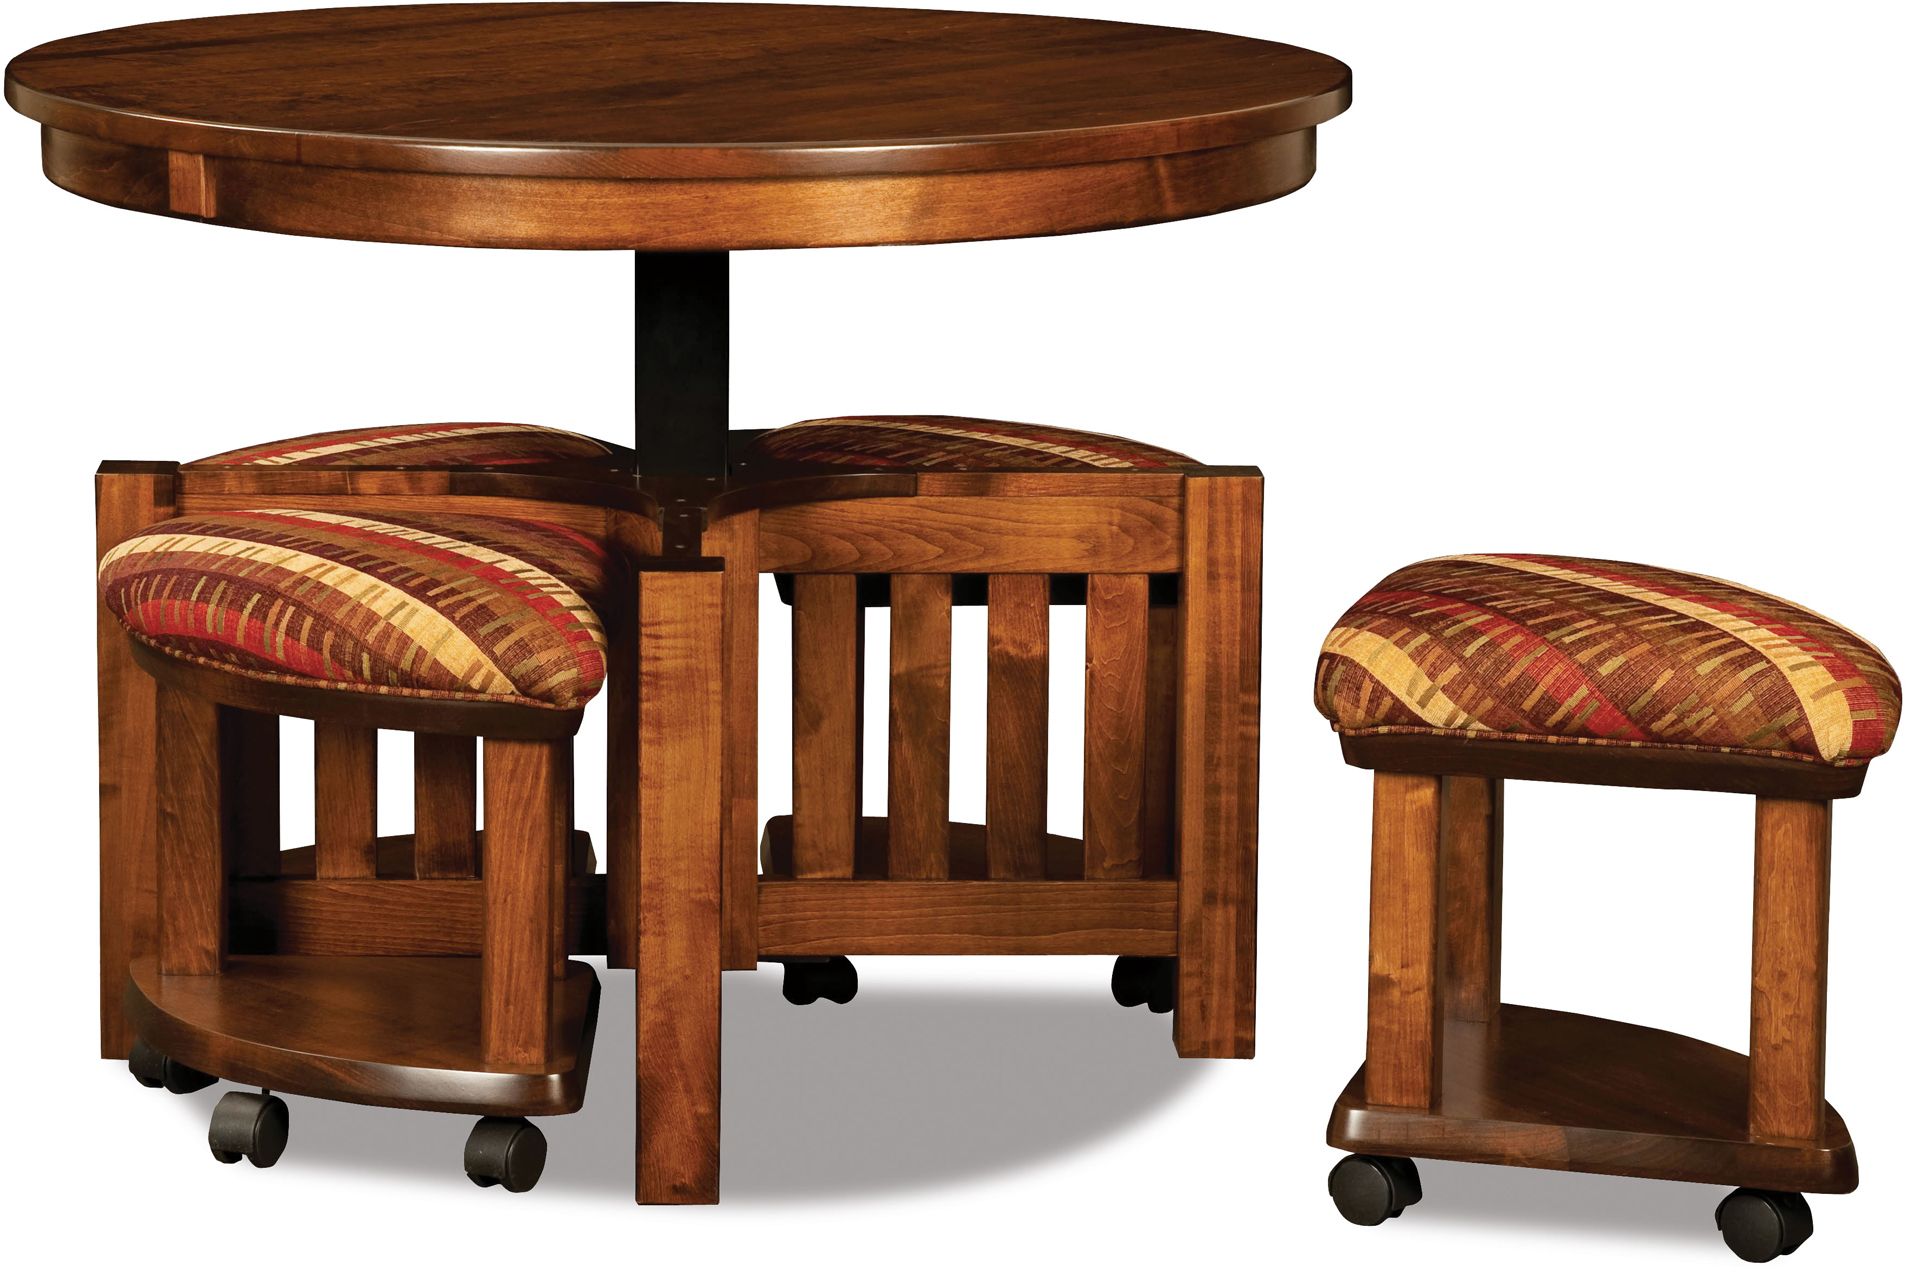 5 Piece Round Table Bench Set | Custom Amish Furniture Within 2 Piece Round Console Tables Set (View 20 of 20)